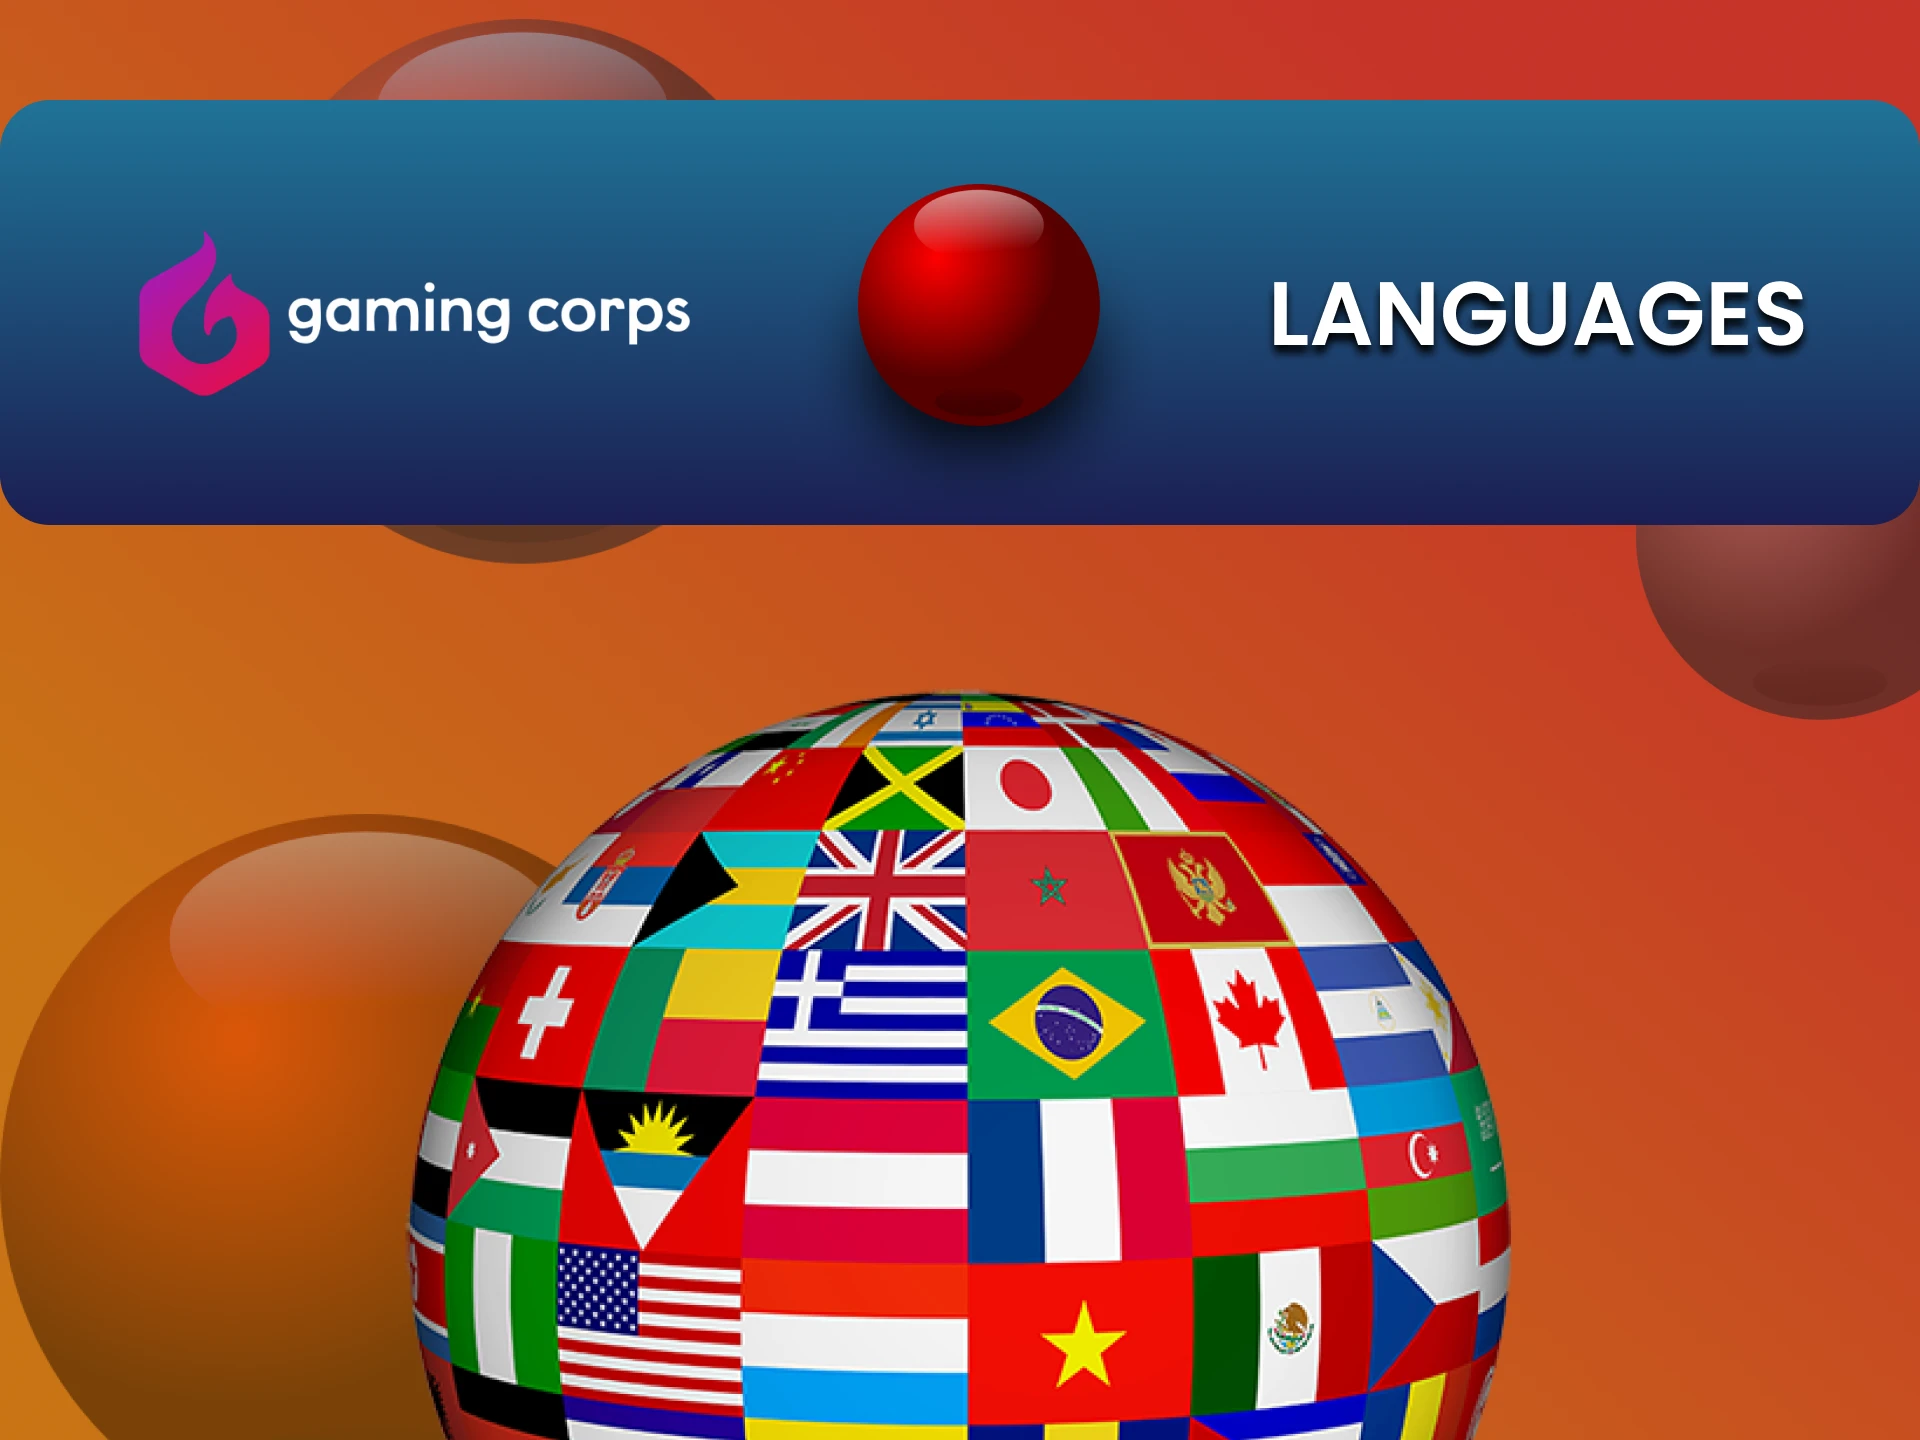 We will tell you about the languages ​​​​available in Gaming Corps games.